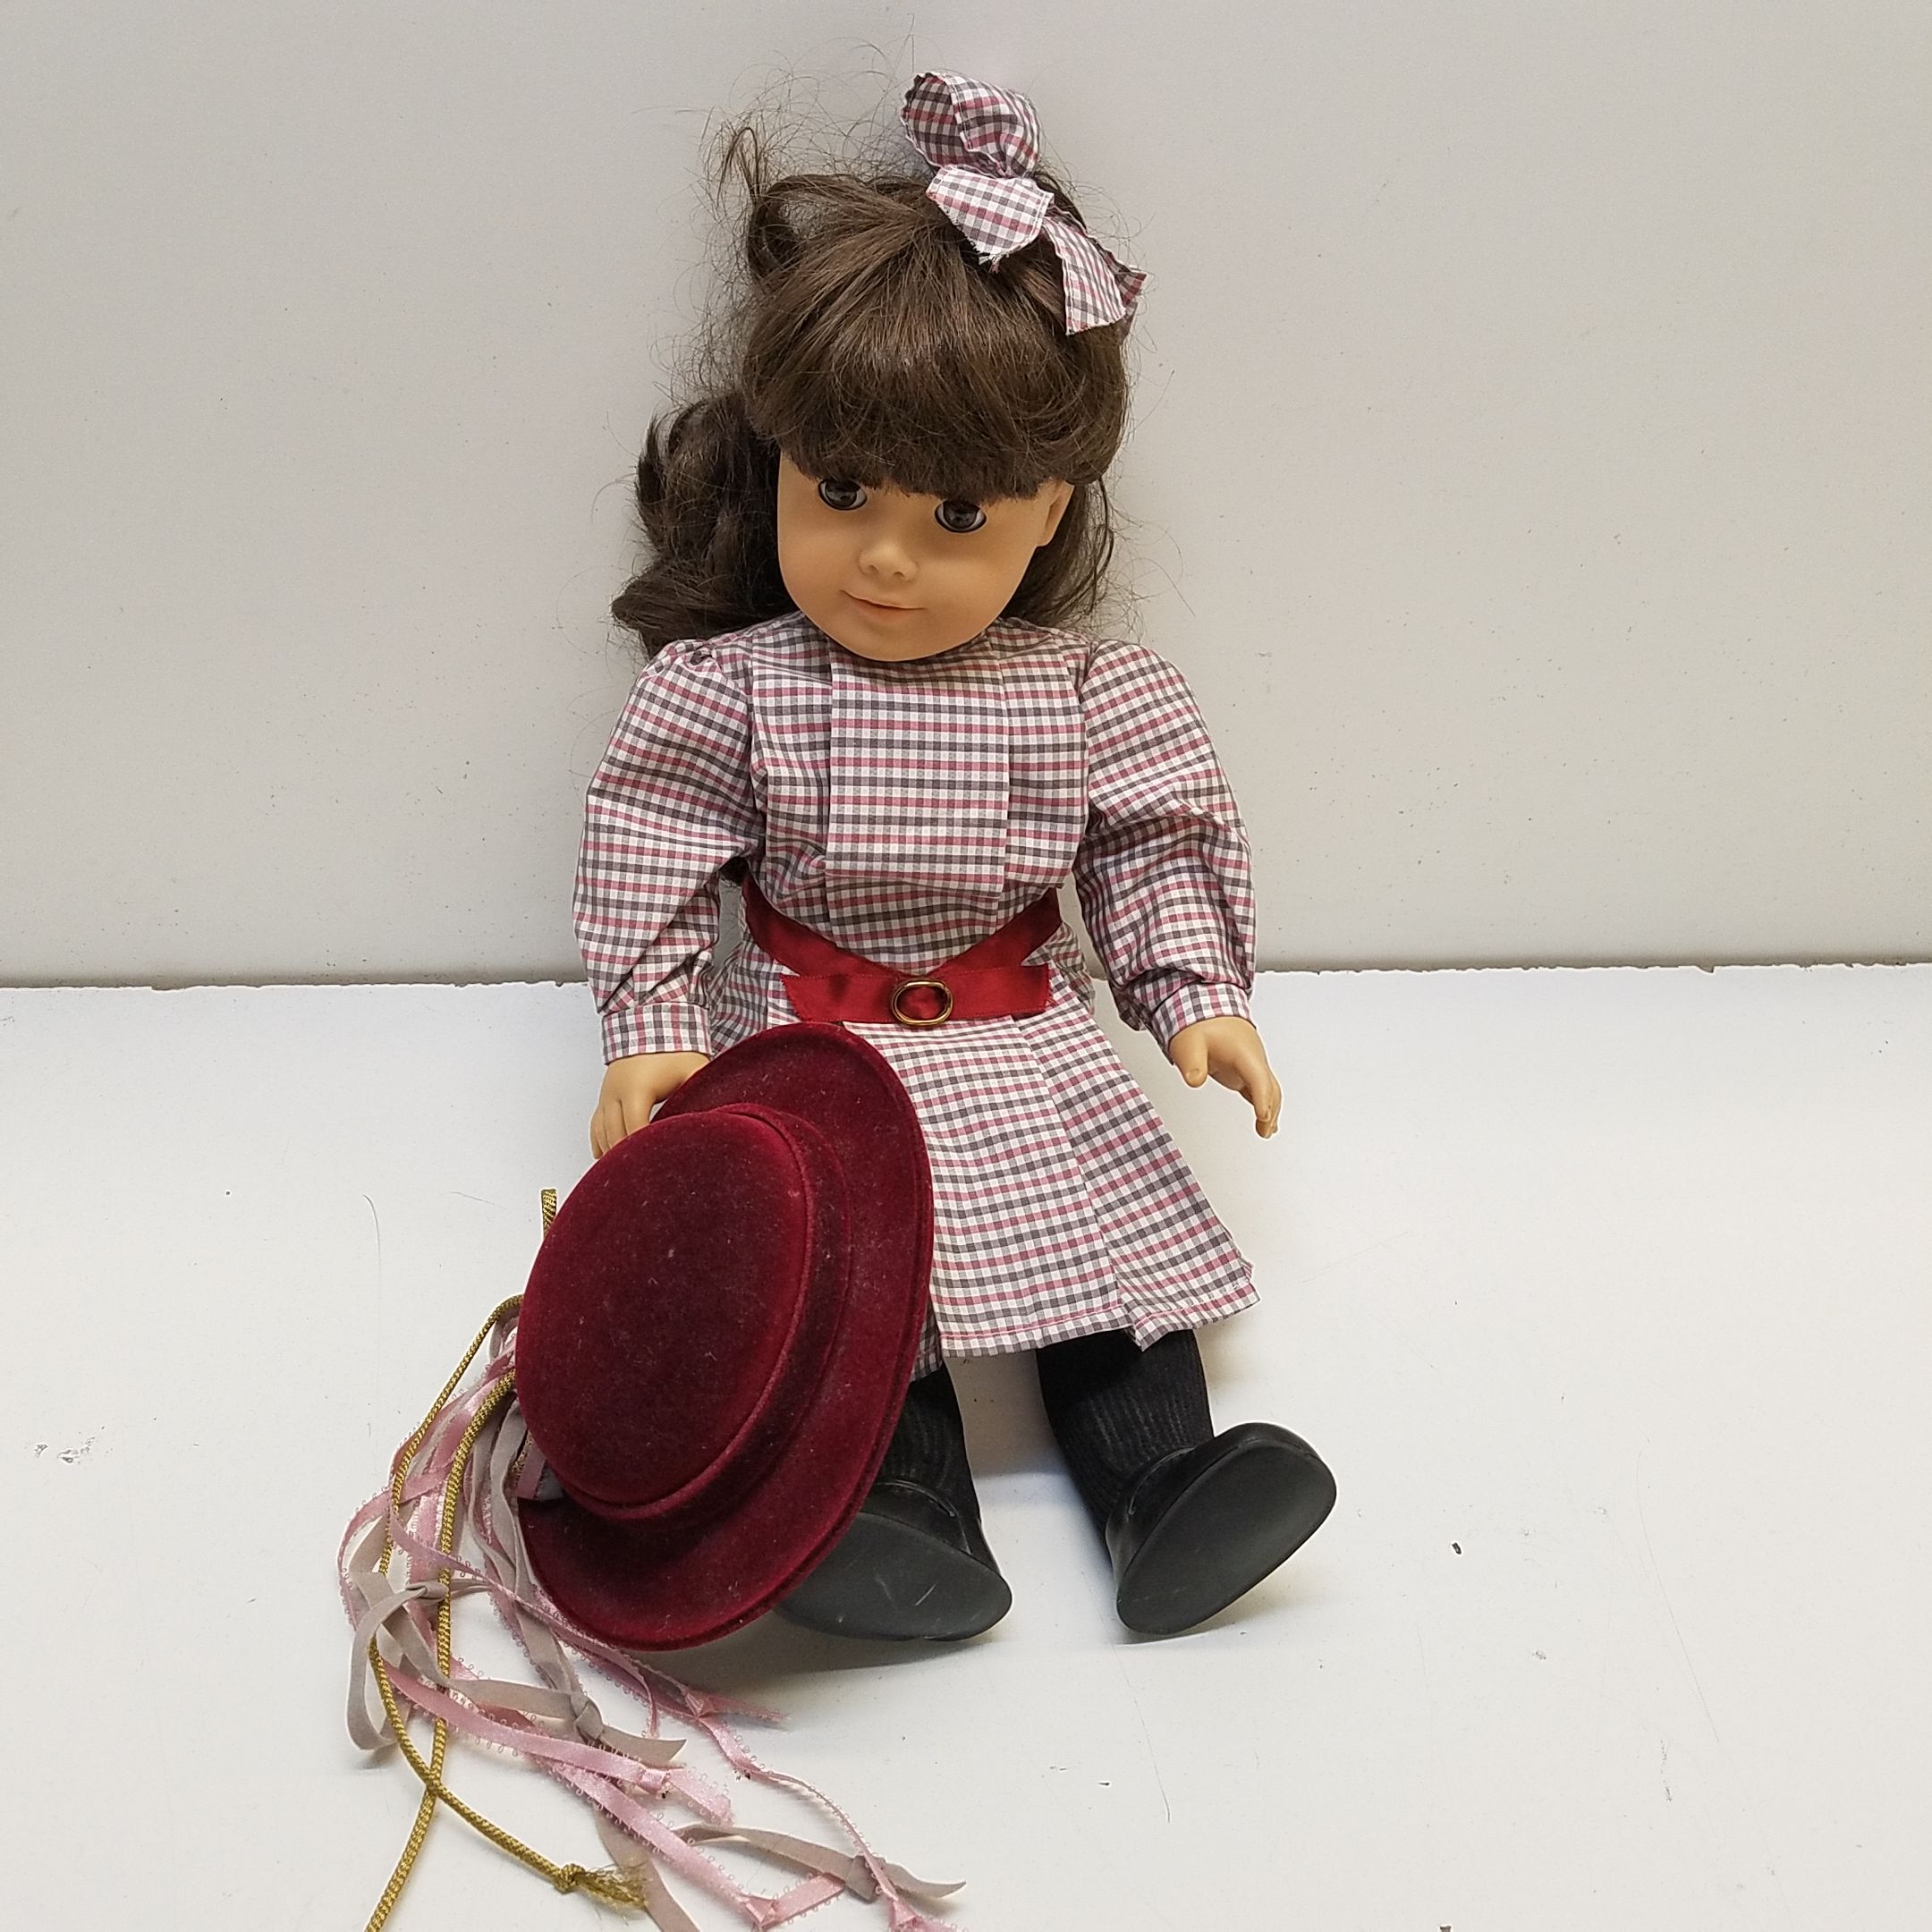 Buy the Pleasant Company American Girl Collection Samantha Doll